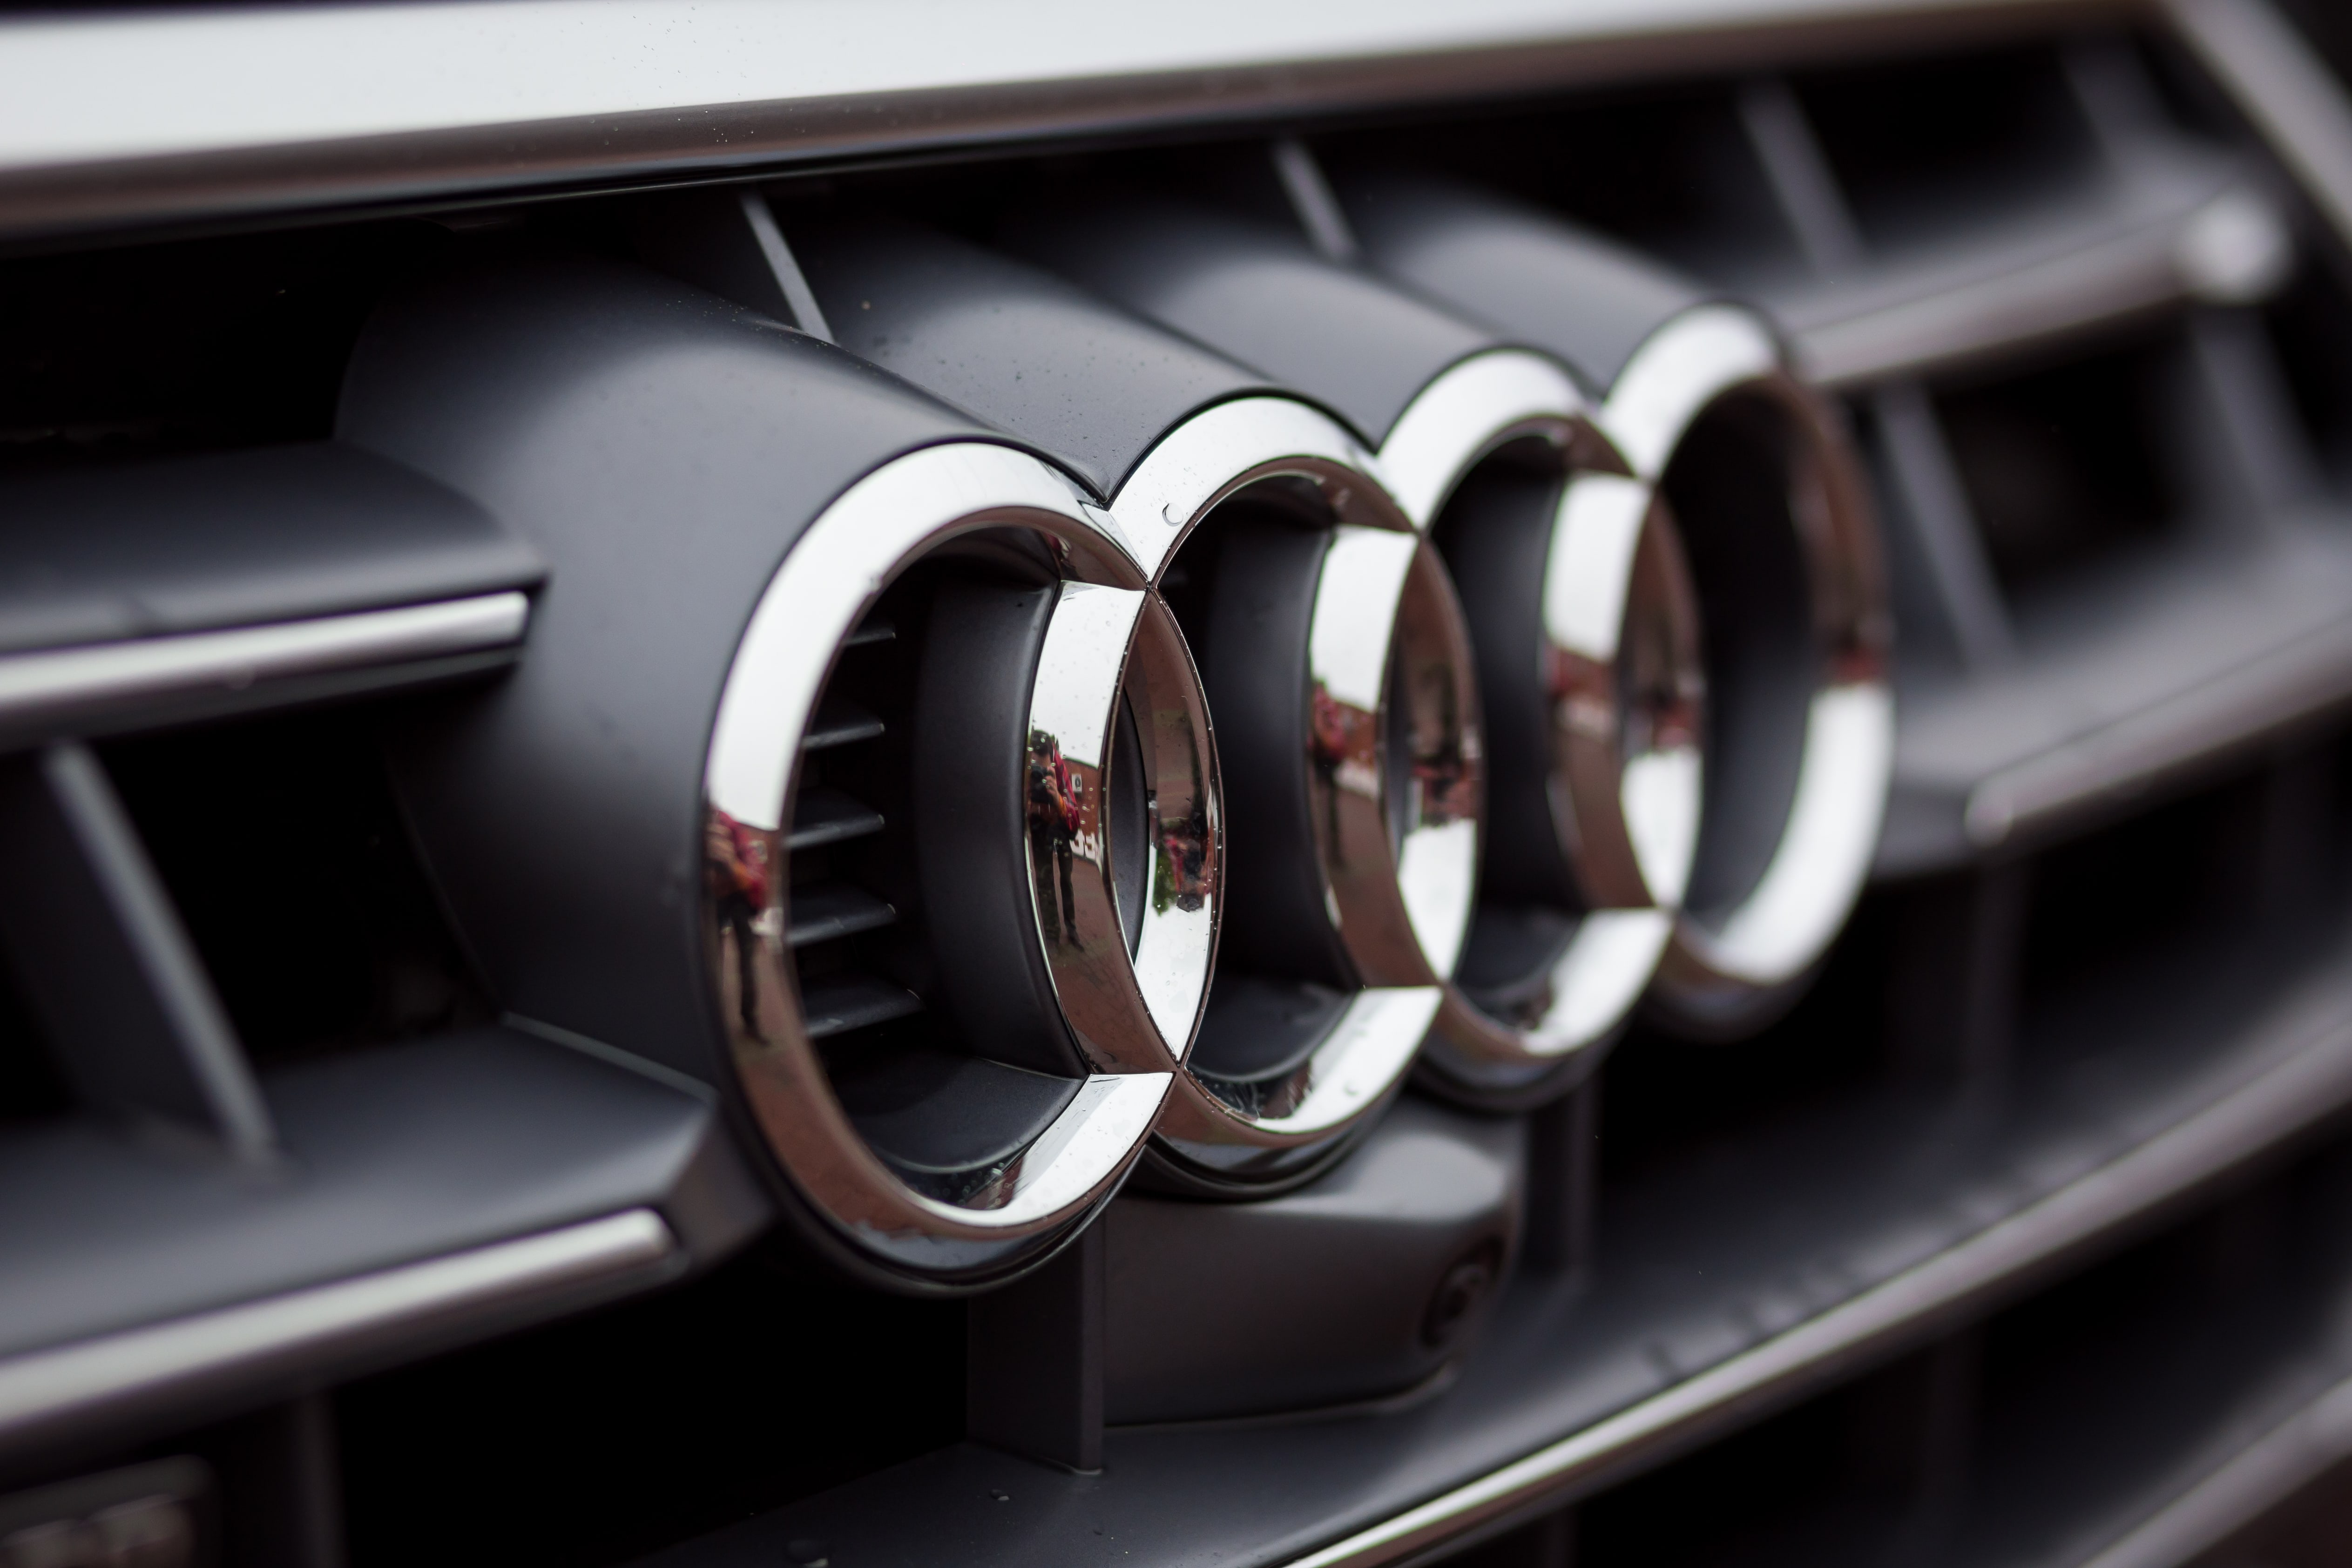 Crazy facts about Audi